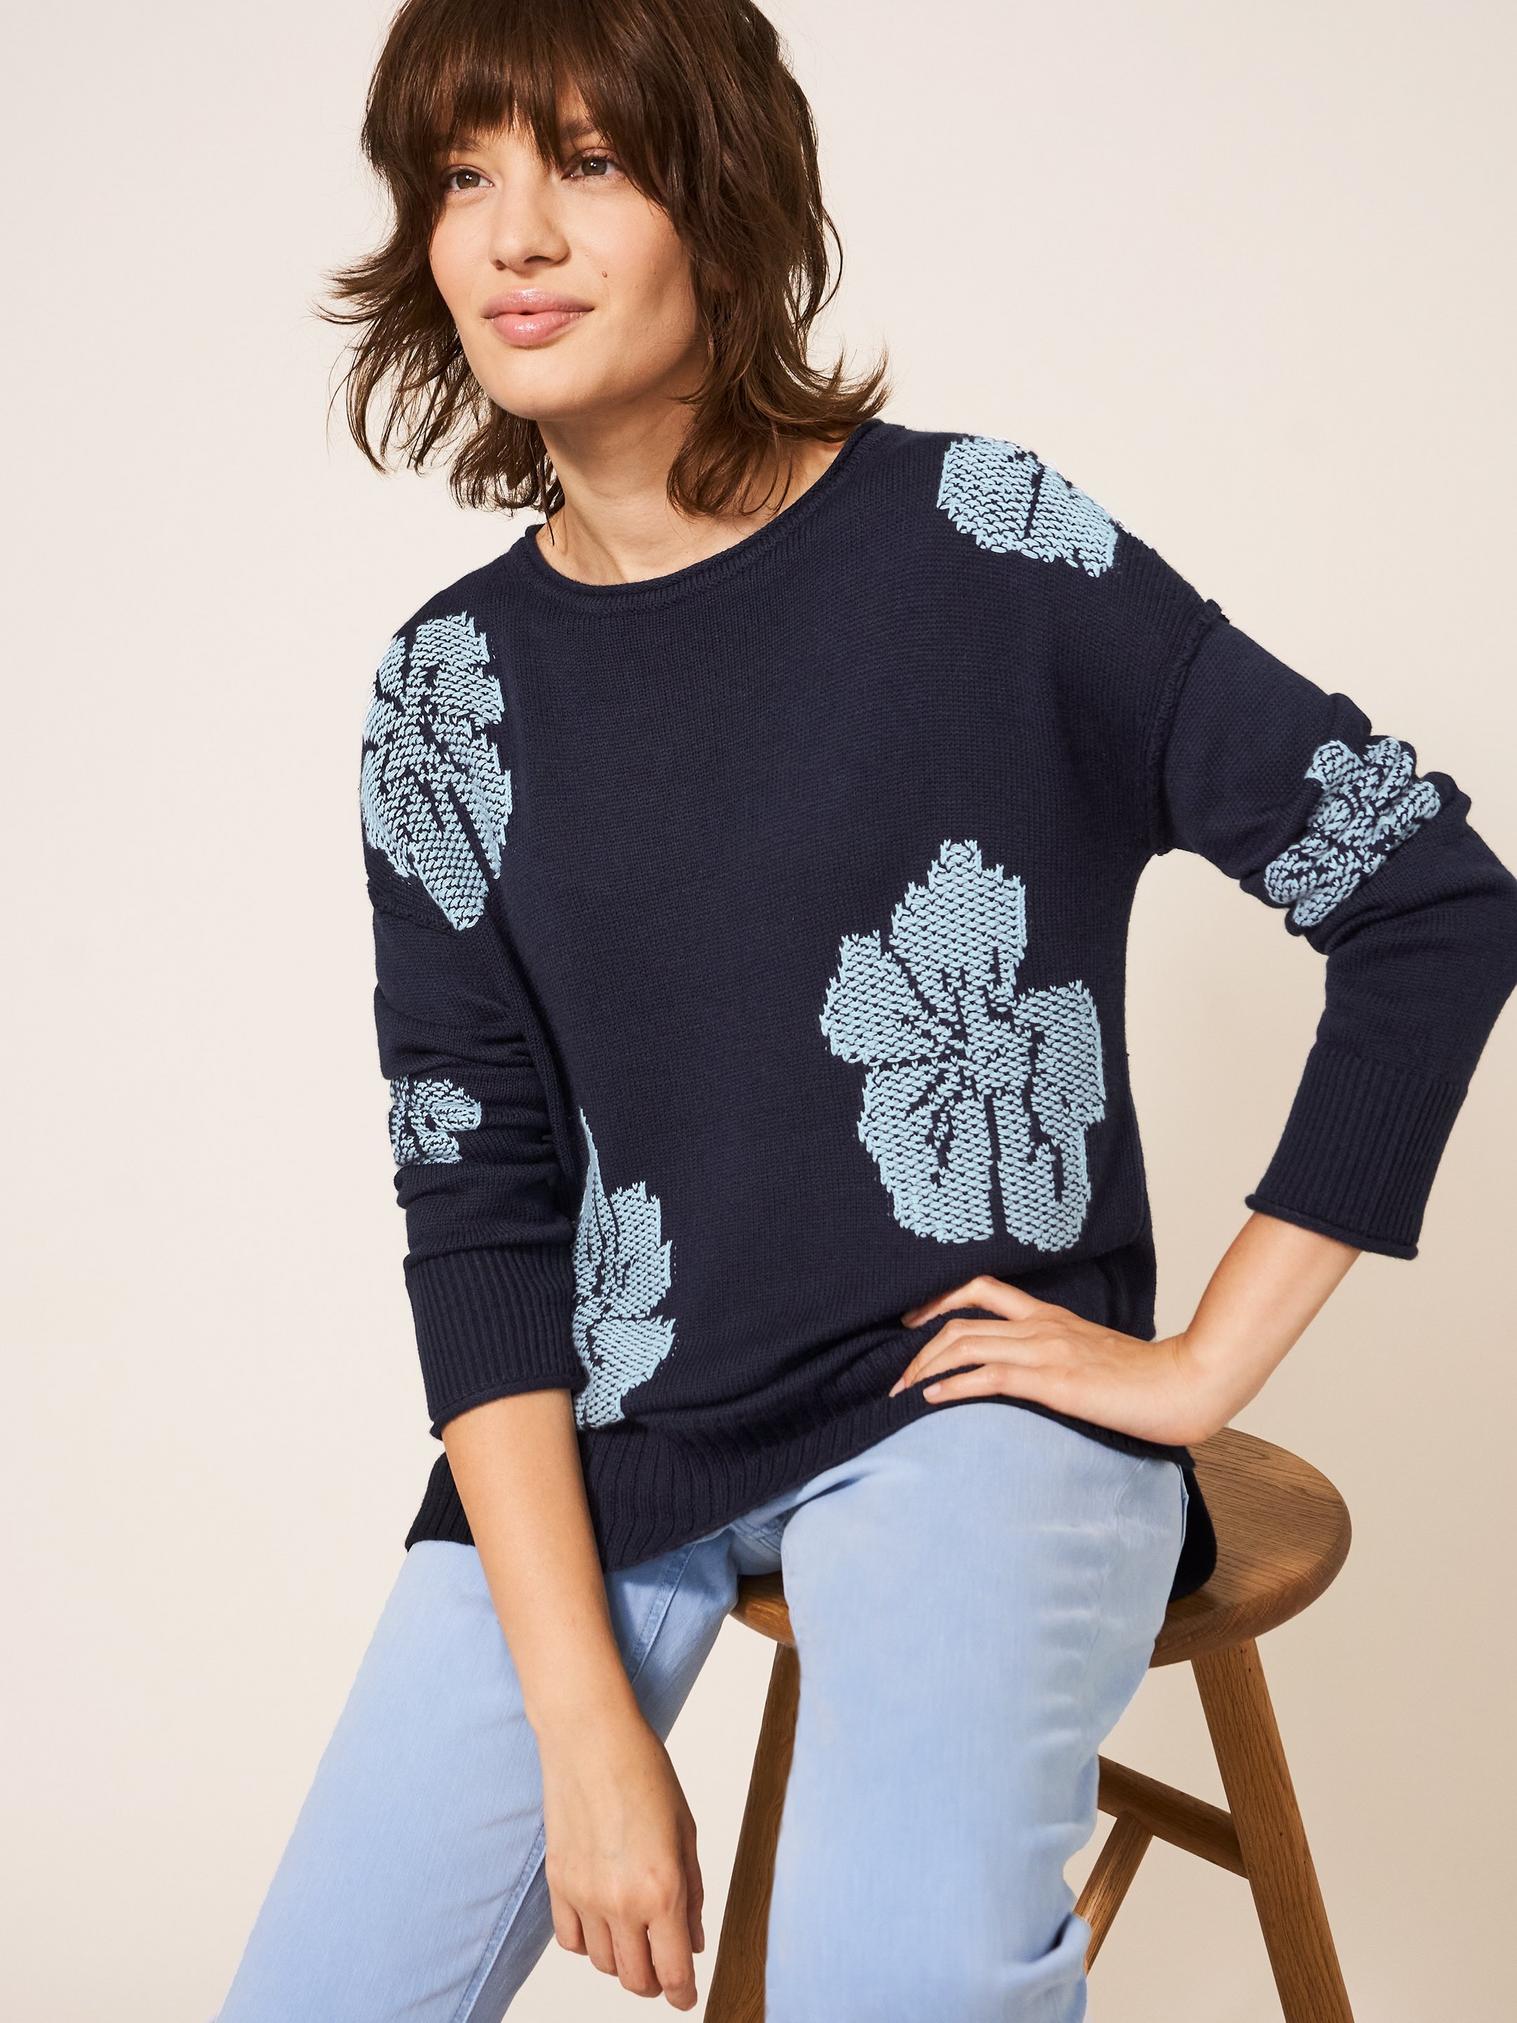 Blossoming Woodland Jumper in NAVY MULTI - LIFESTYLE